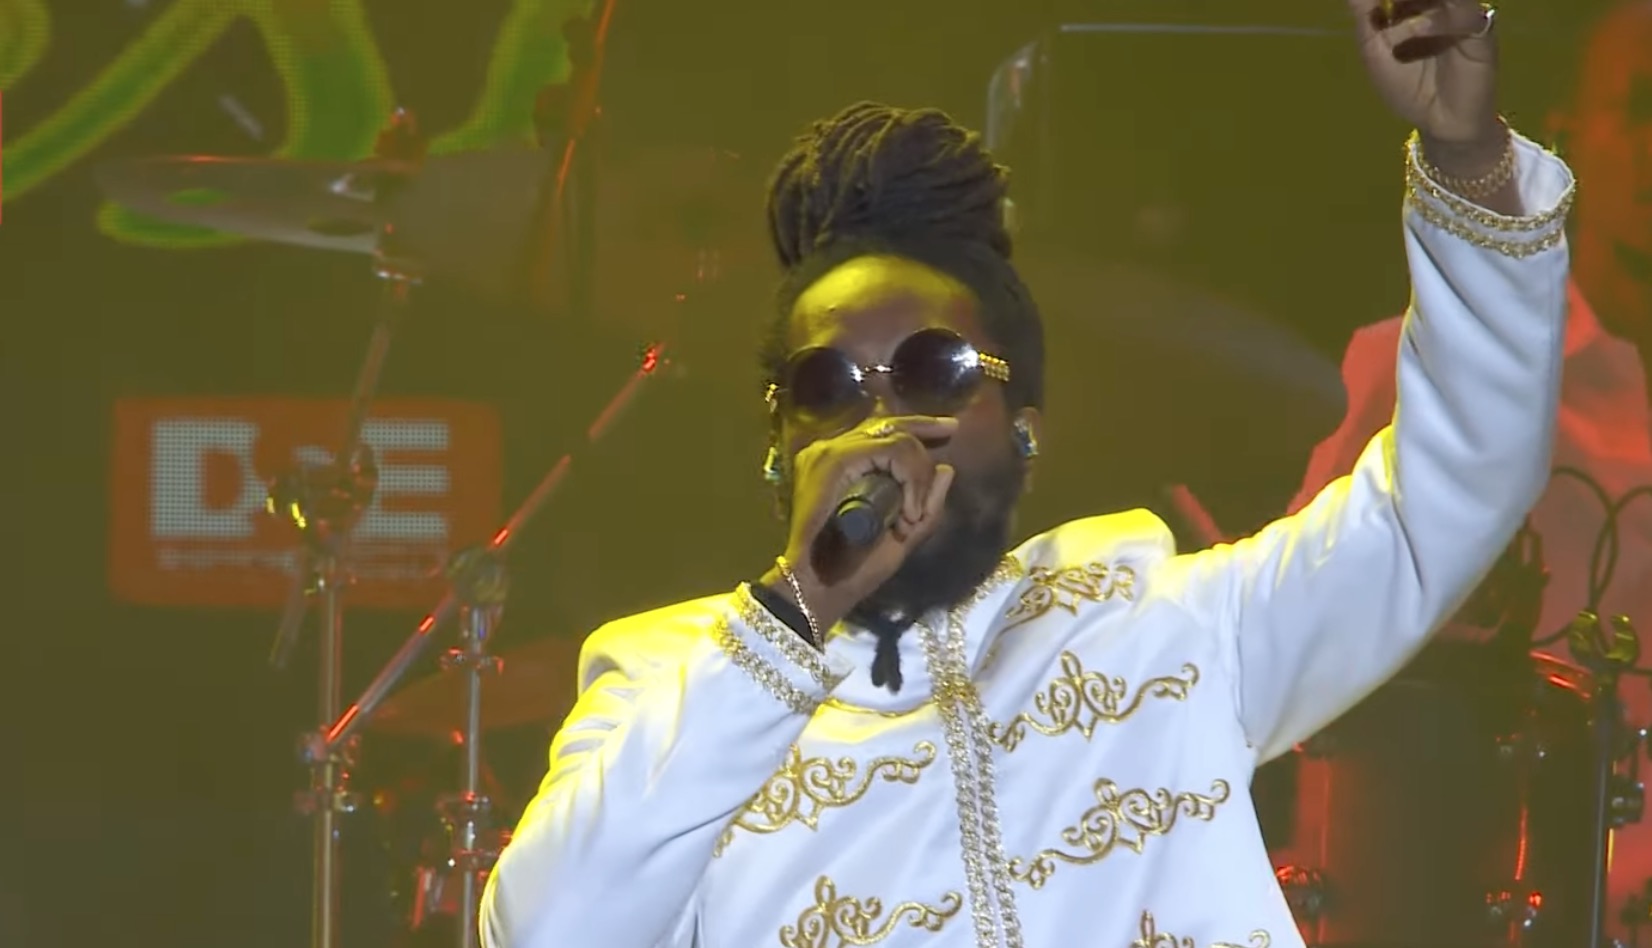 Kabaka Pyramid Gave 'Grammy Winning' Performance at Reggae Sumfest 2023; 'bun out' The Molly Poppers, Scammers, Dunce Heads and Obeah Workers - Watch Video